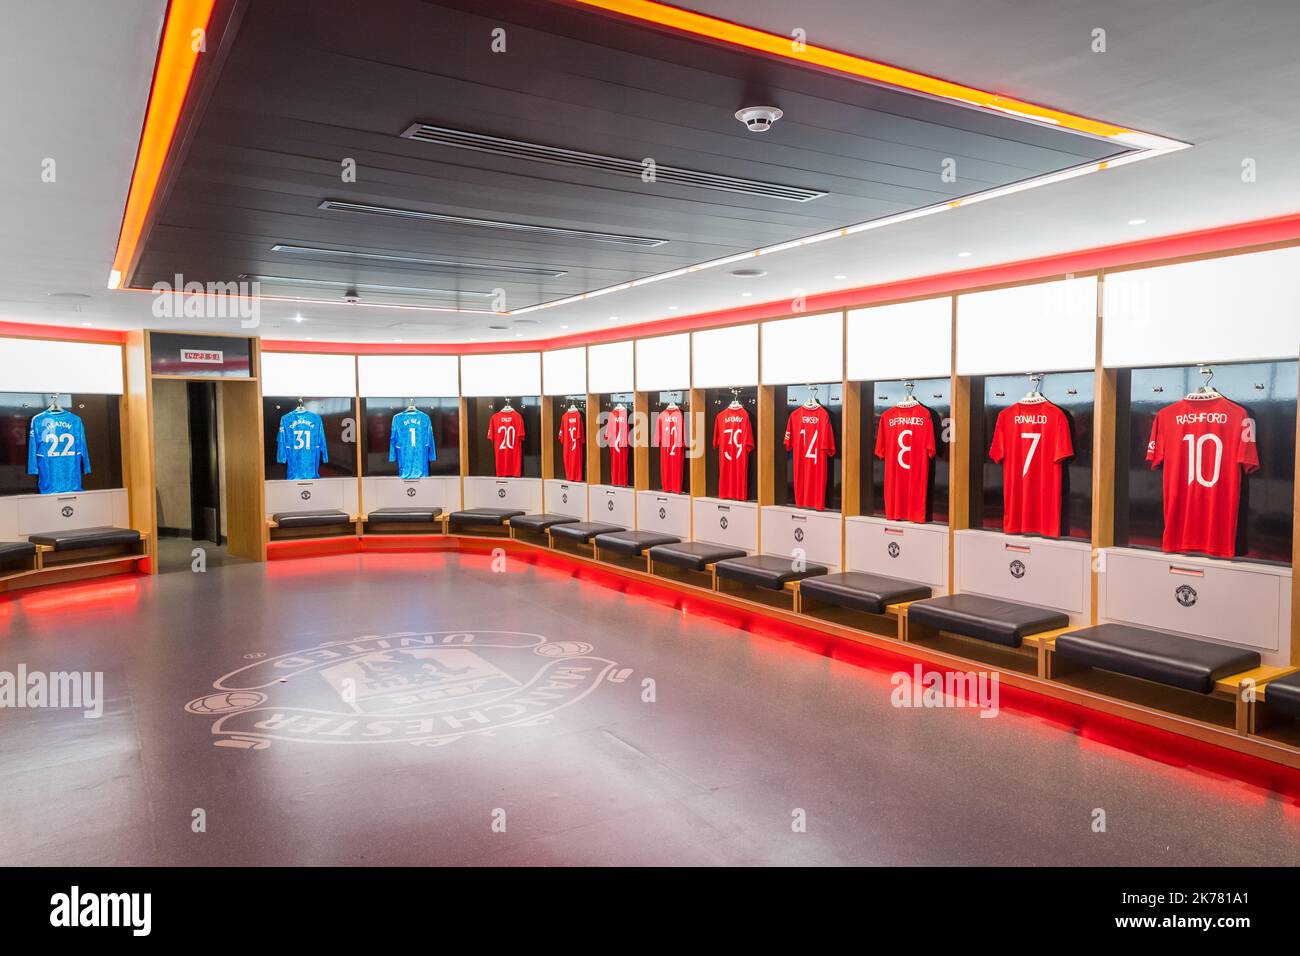 Manchester United's changing room at Old Trafford stadium Stock Photo